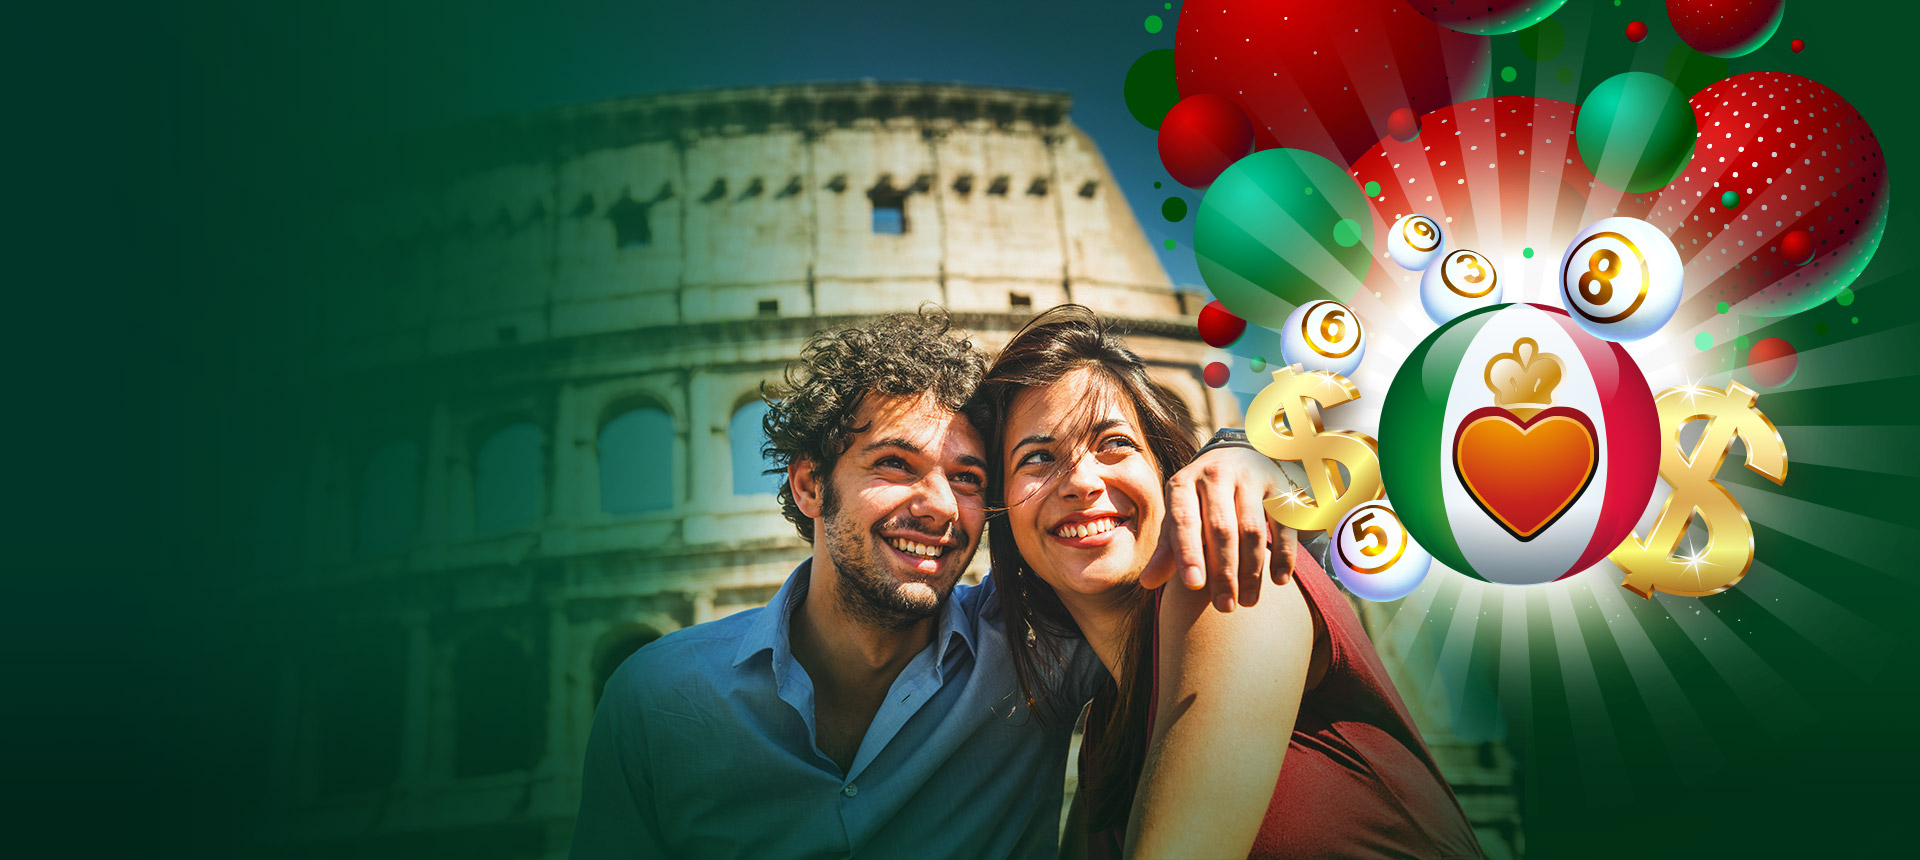 We bring you Italy's best lottery! €275 MILLION JACKPOT! Play SuperEnalotto now!